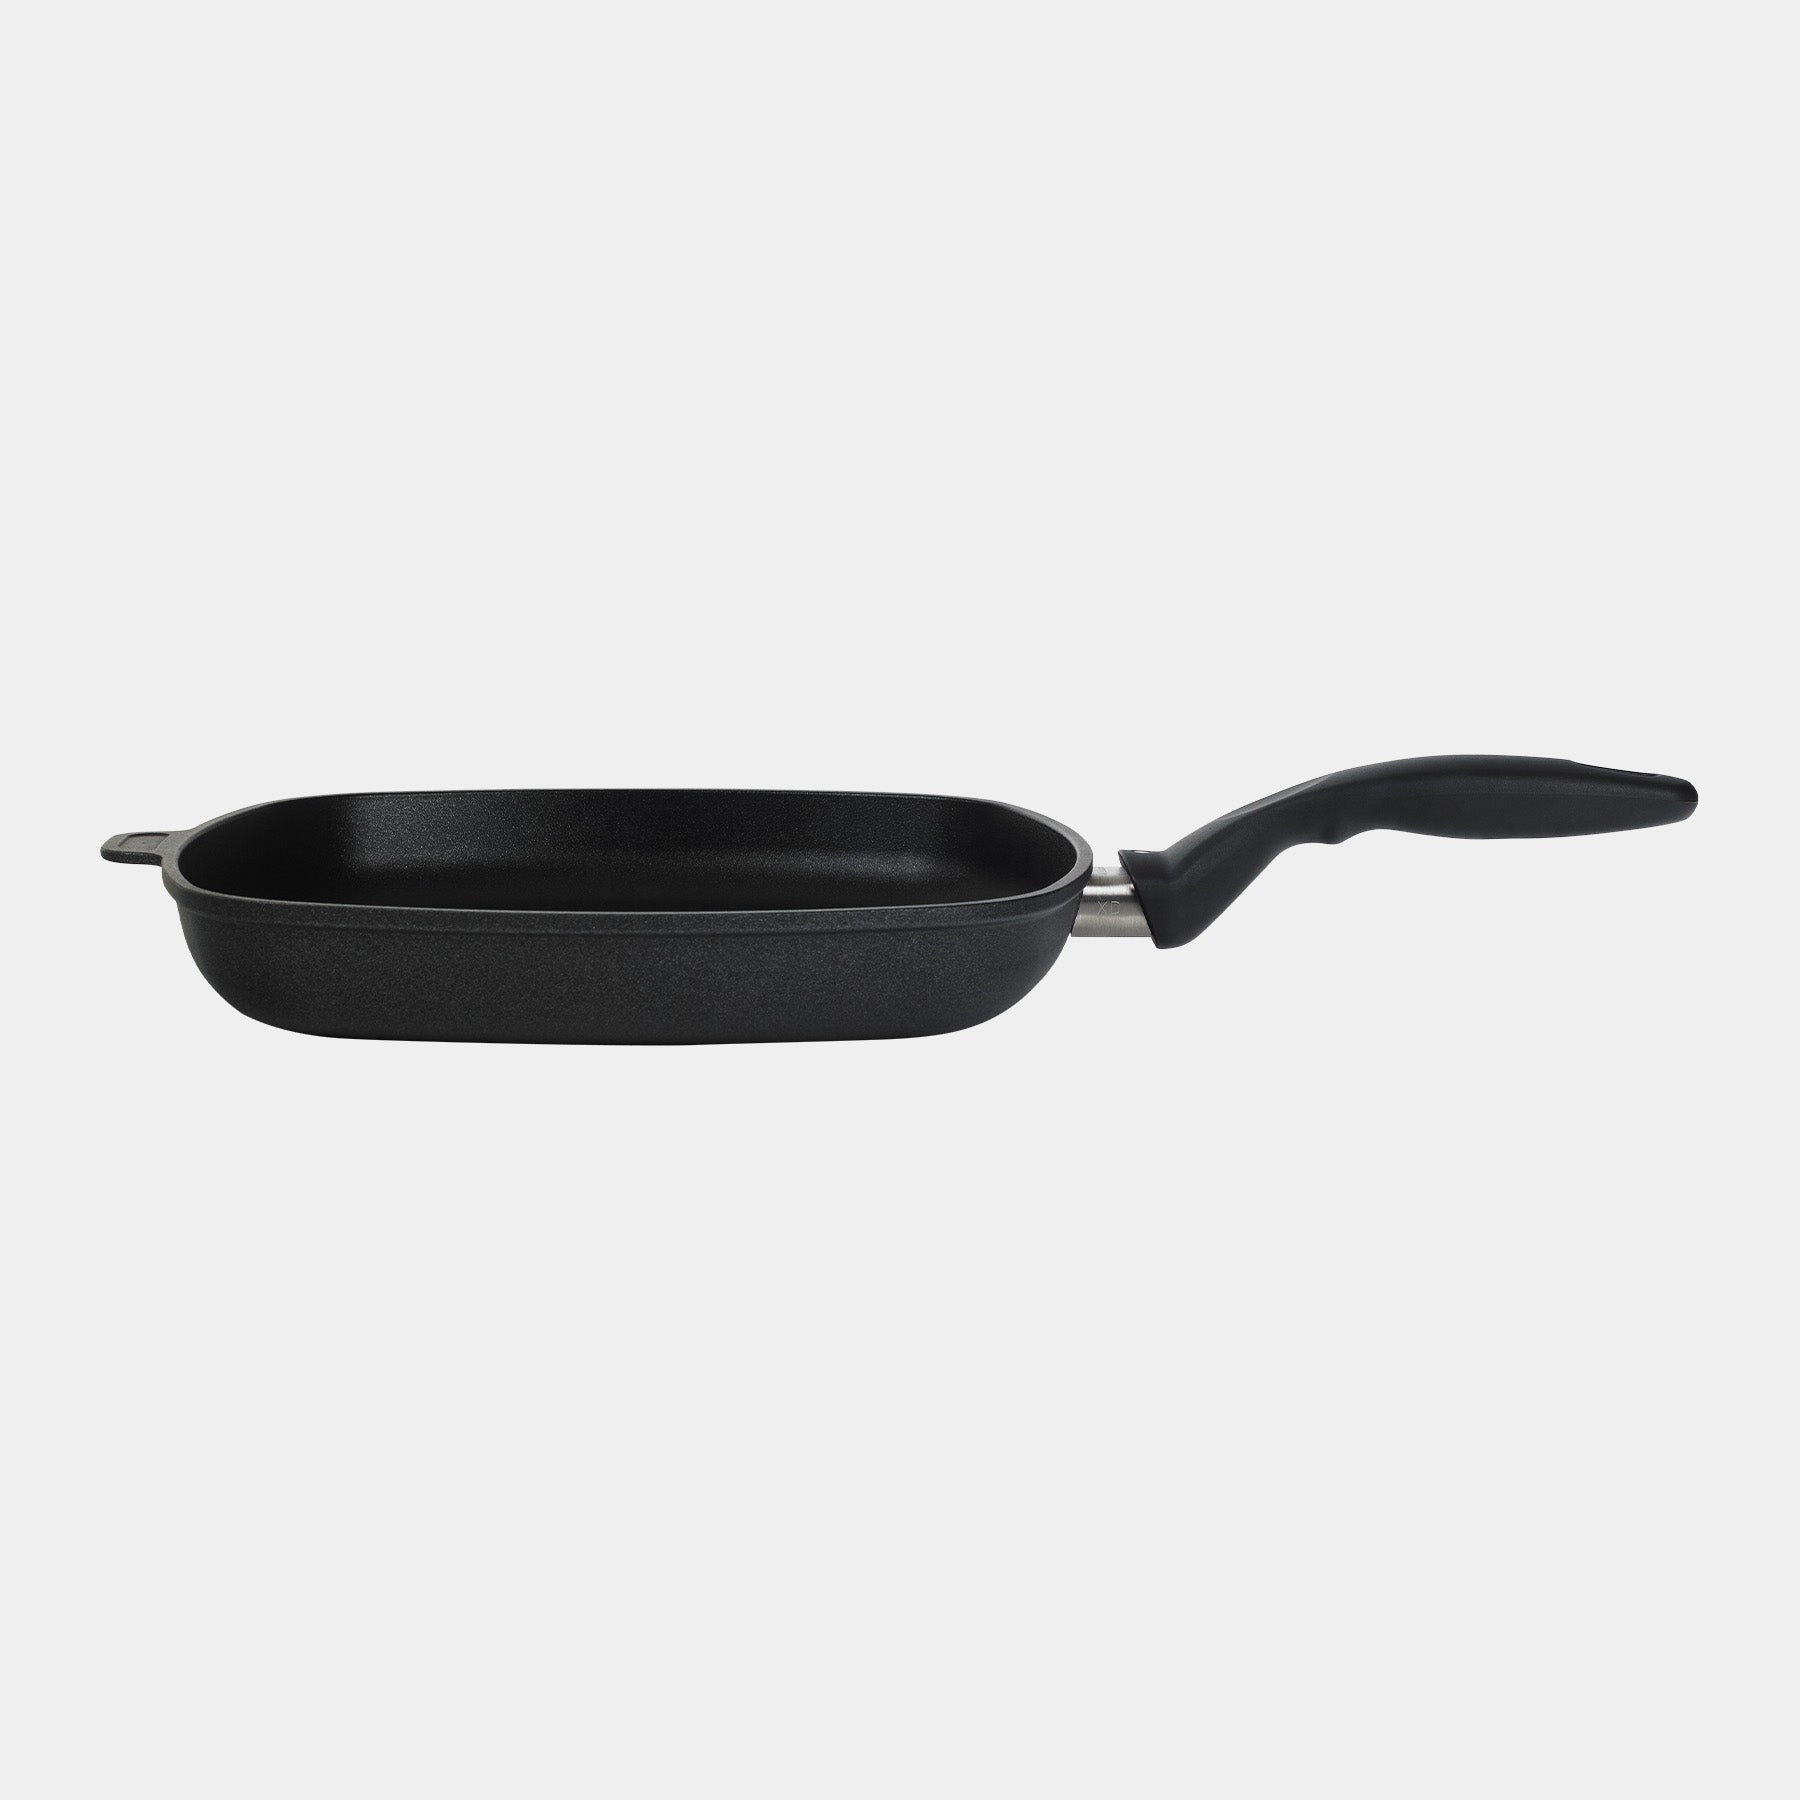 XD Nonstick 11" x 11" Square Fry Pan - side view